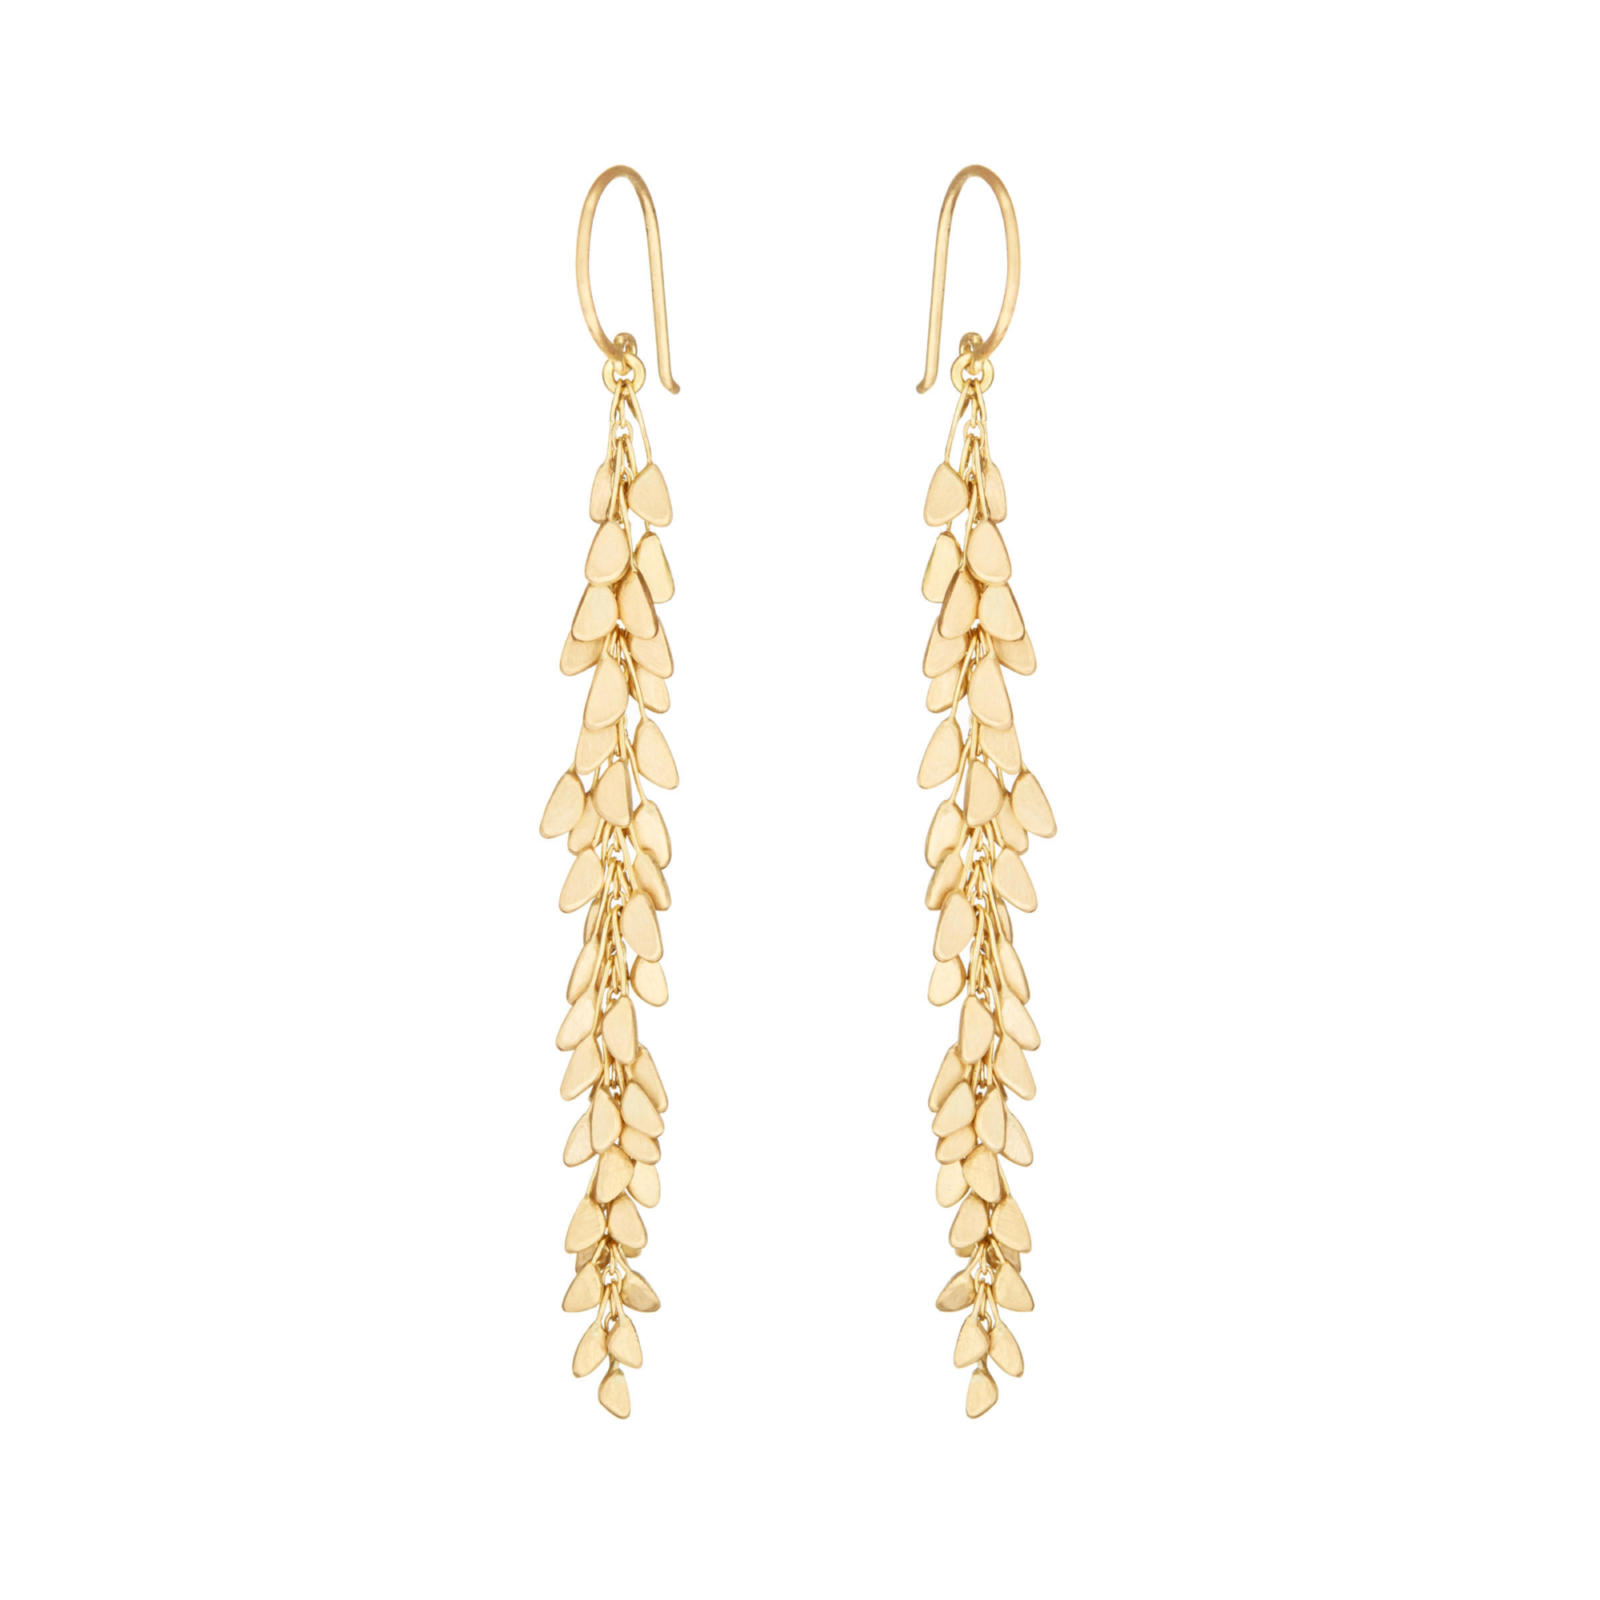 Sia Taylor ME8 Y Yellow Gold Earrings S